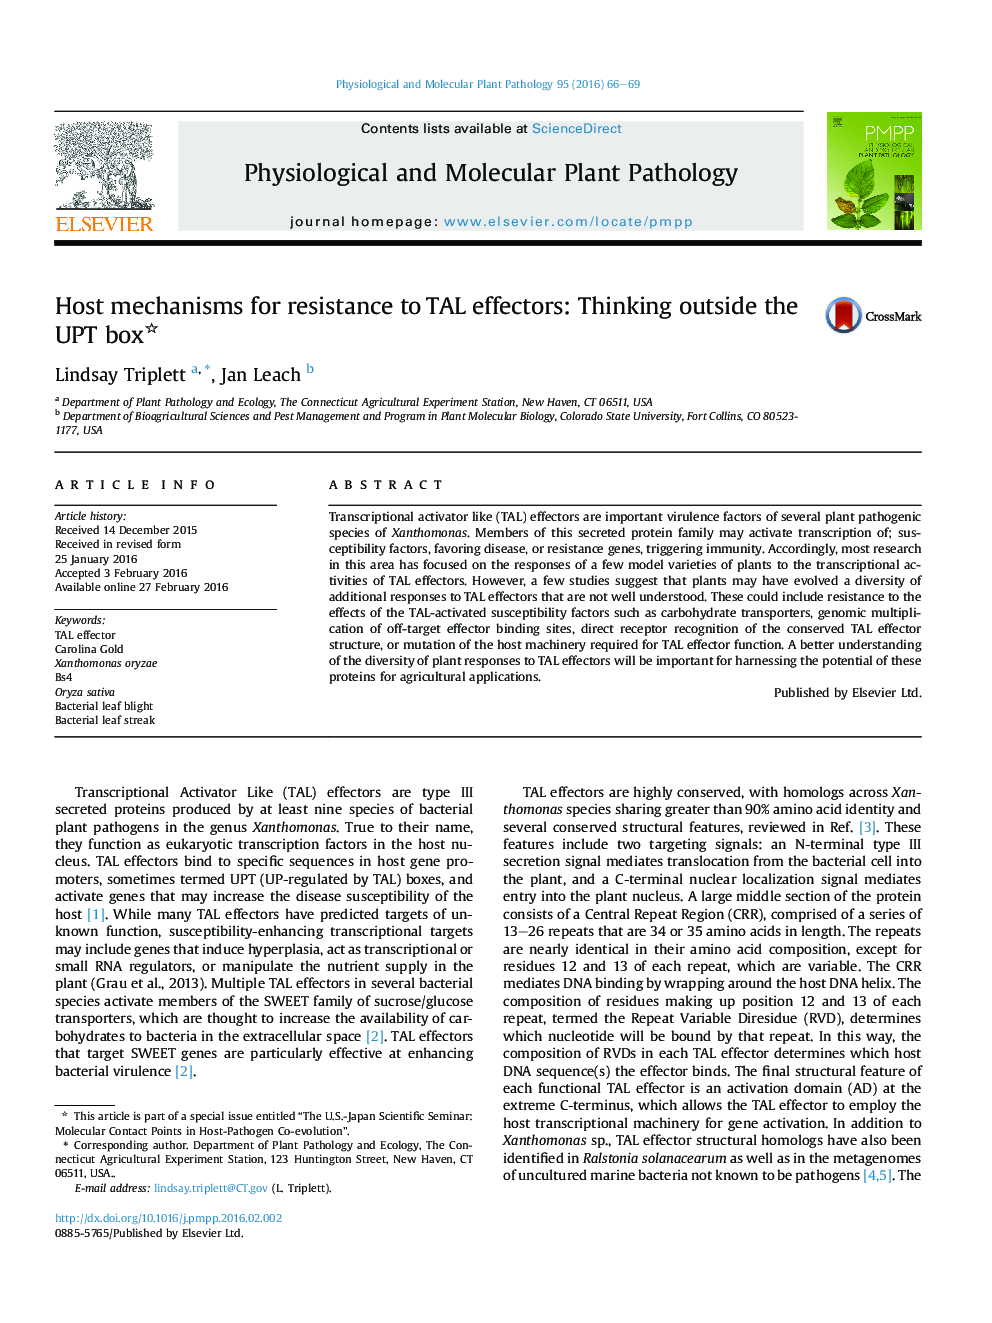 Host mechanisms for resistance to TAL effectors: Thinking outside the UPT box 